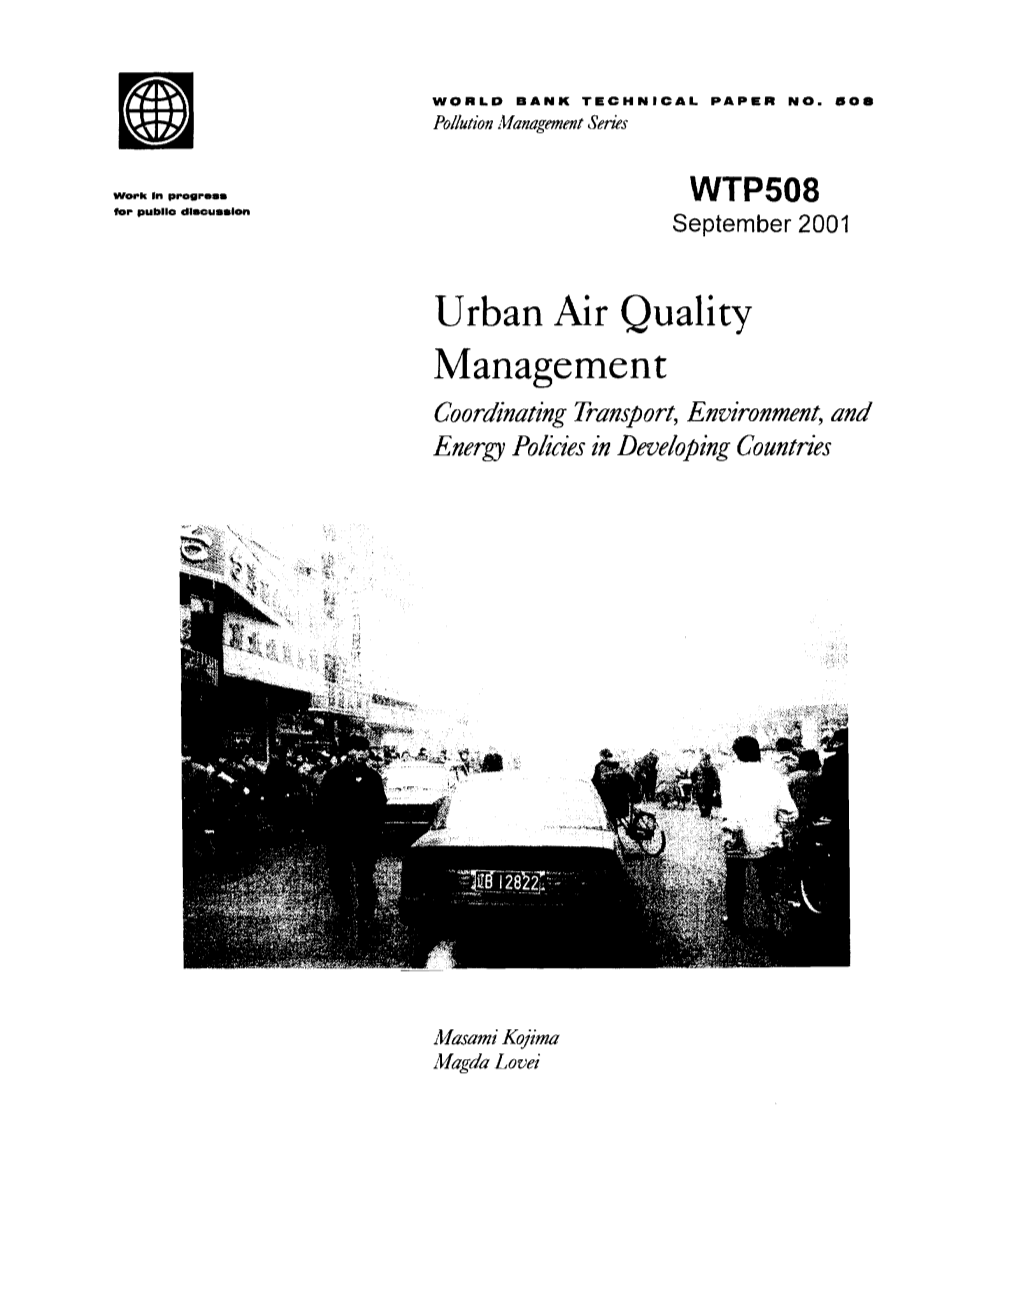 Urban Air Quality Management Coordinatingtransport, Environment, and Energypolicies in Developingcountries